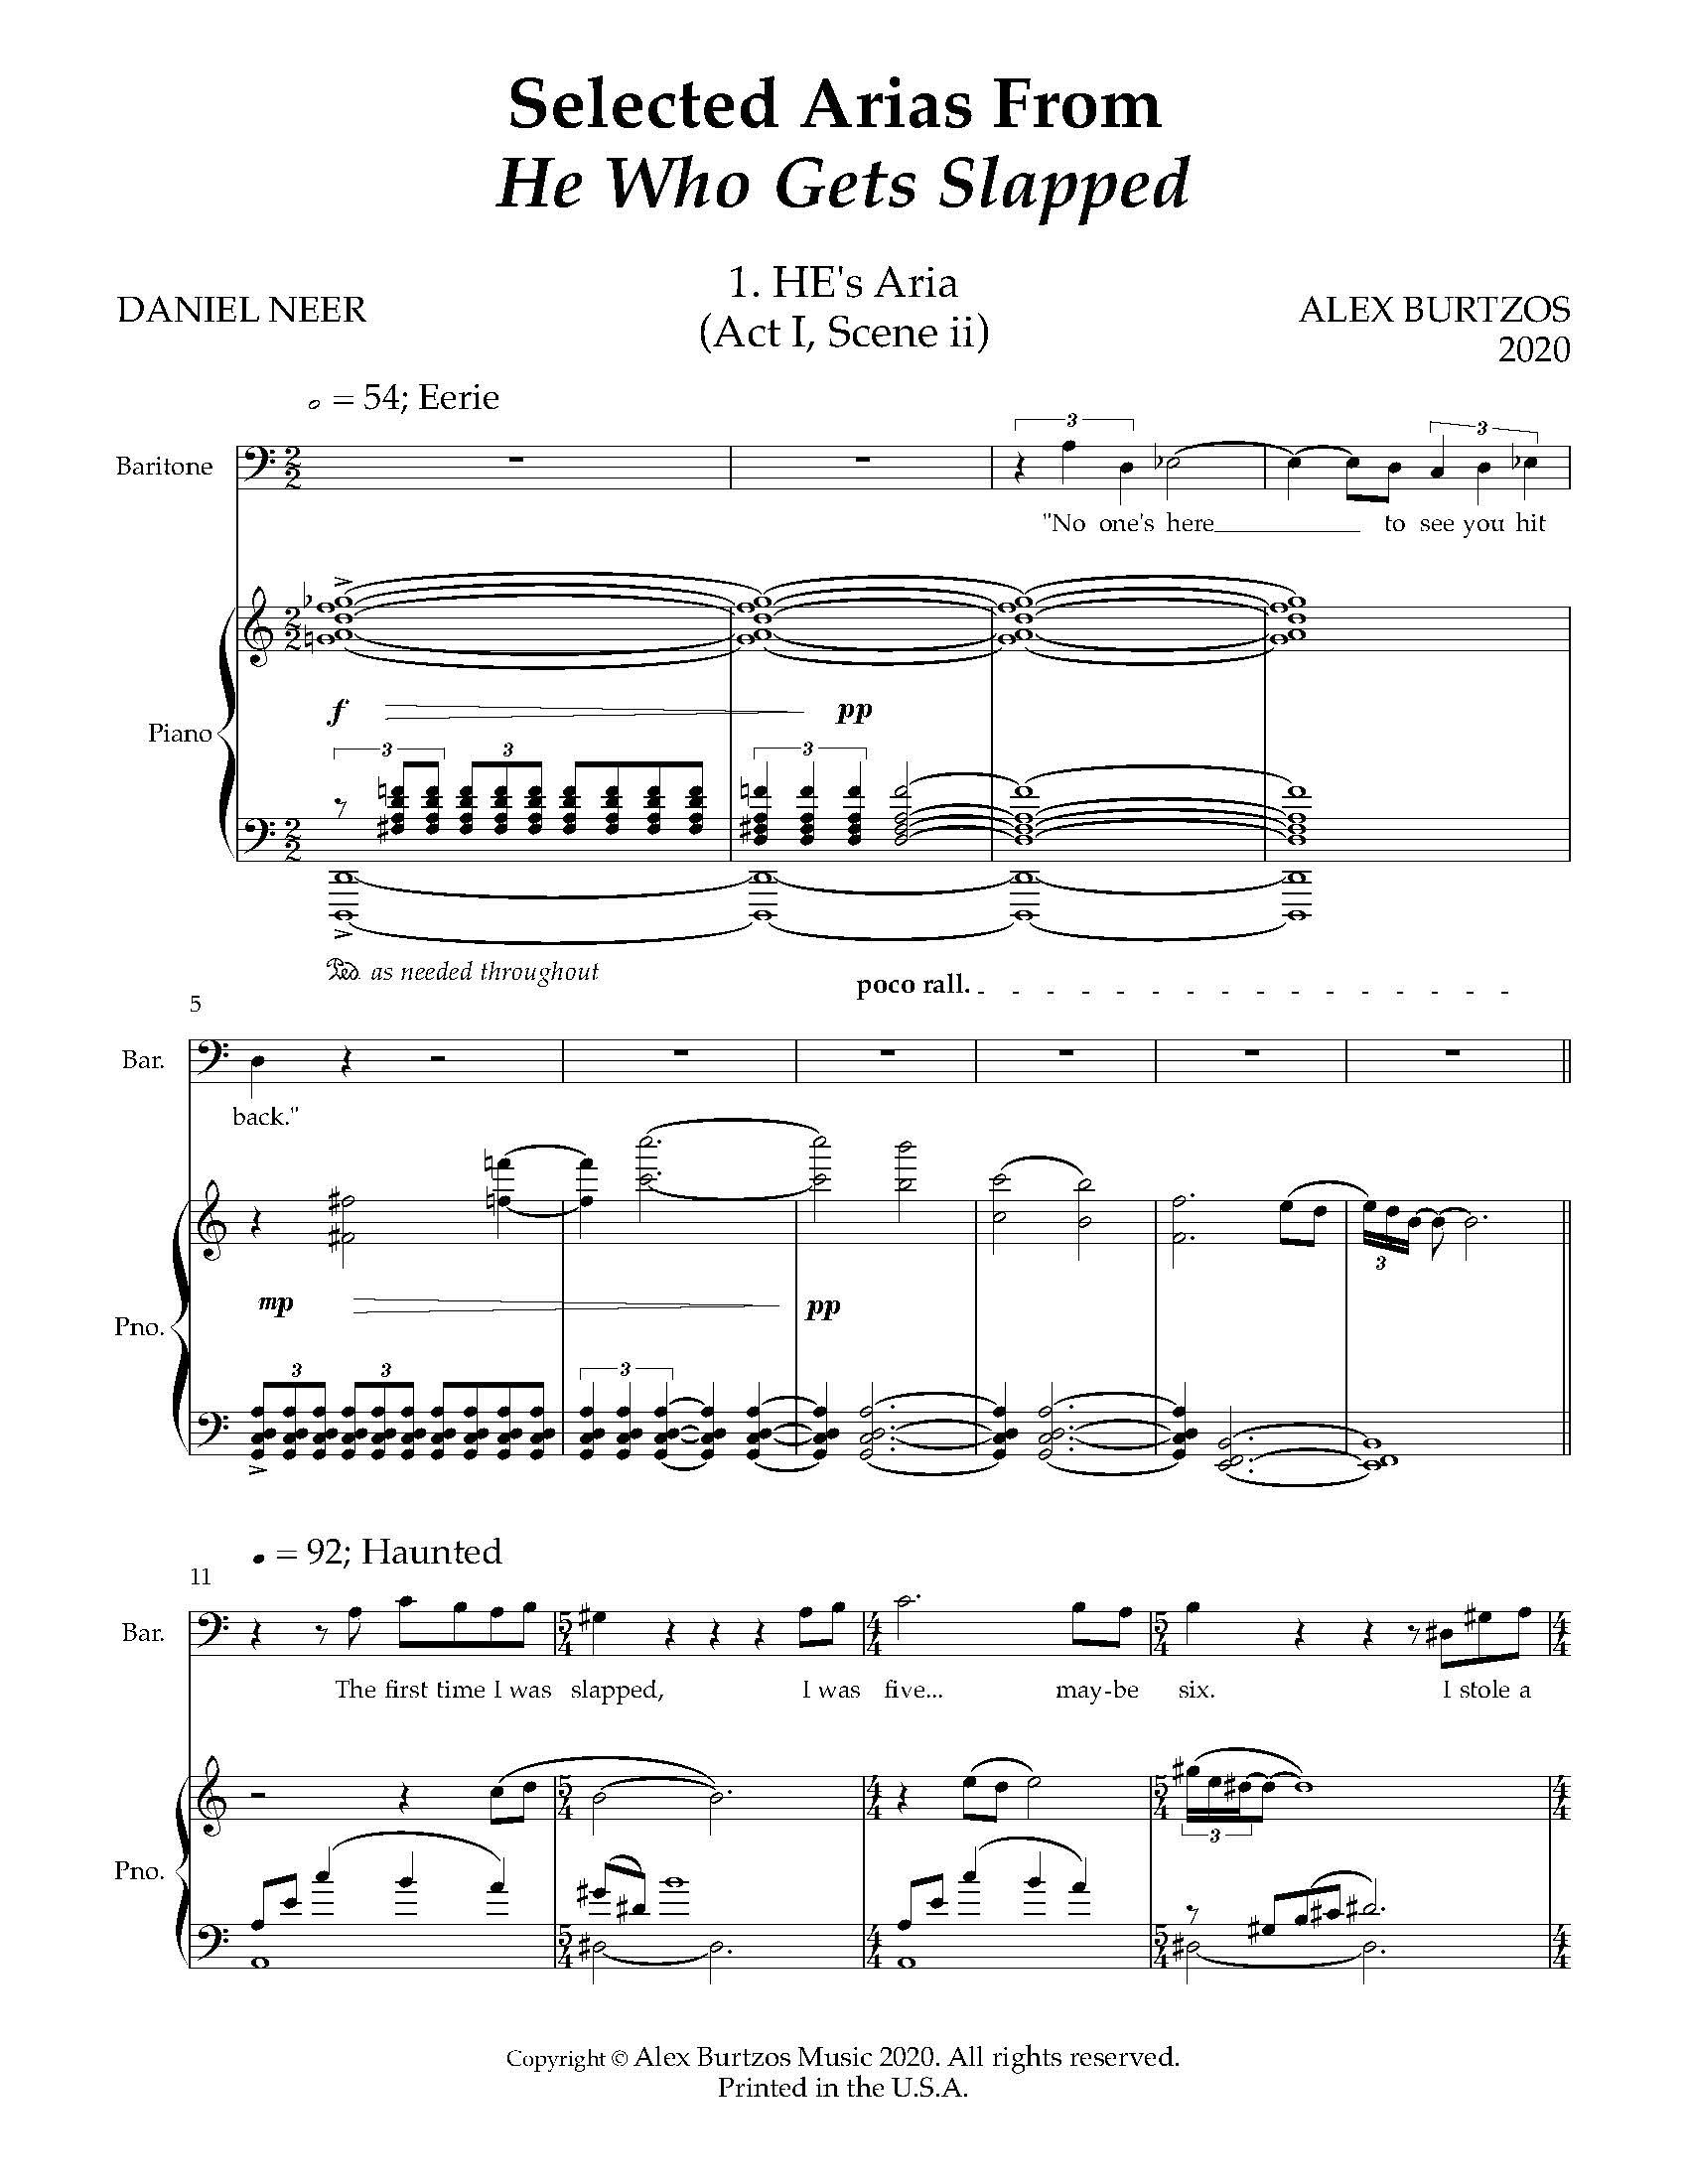 Five Arias from HWGS - Complete Score (1)_Page_05.jpg